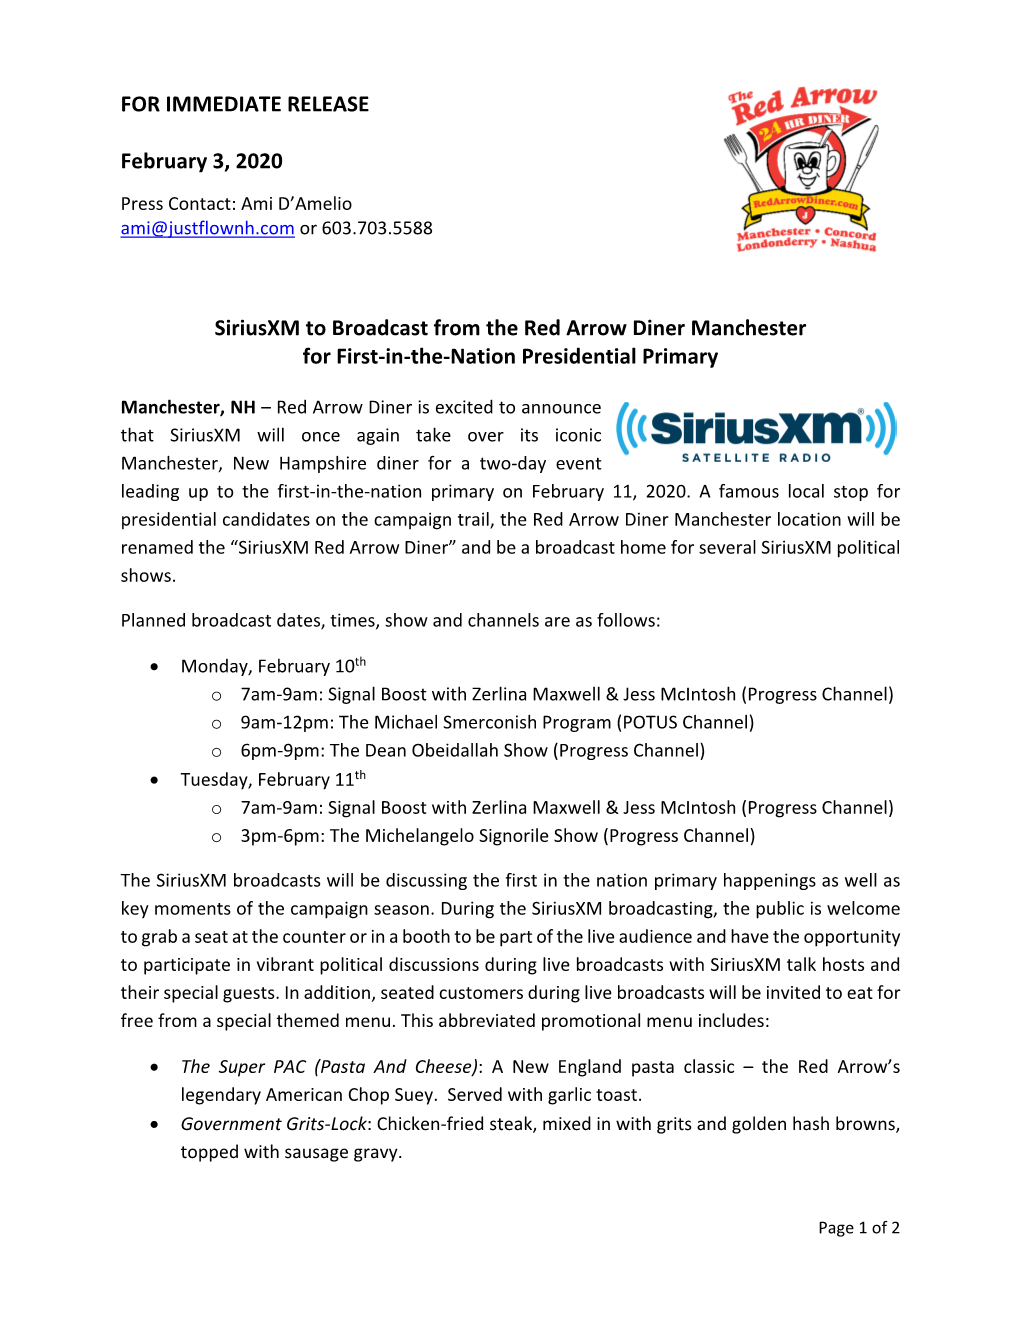 FOR IMMEDIATE RELEASE February 3, 2020 Siriusxm to Broadcast From